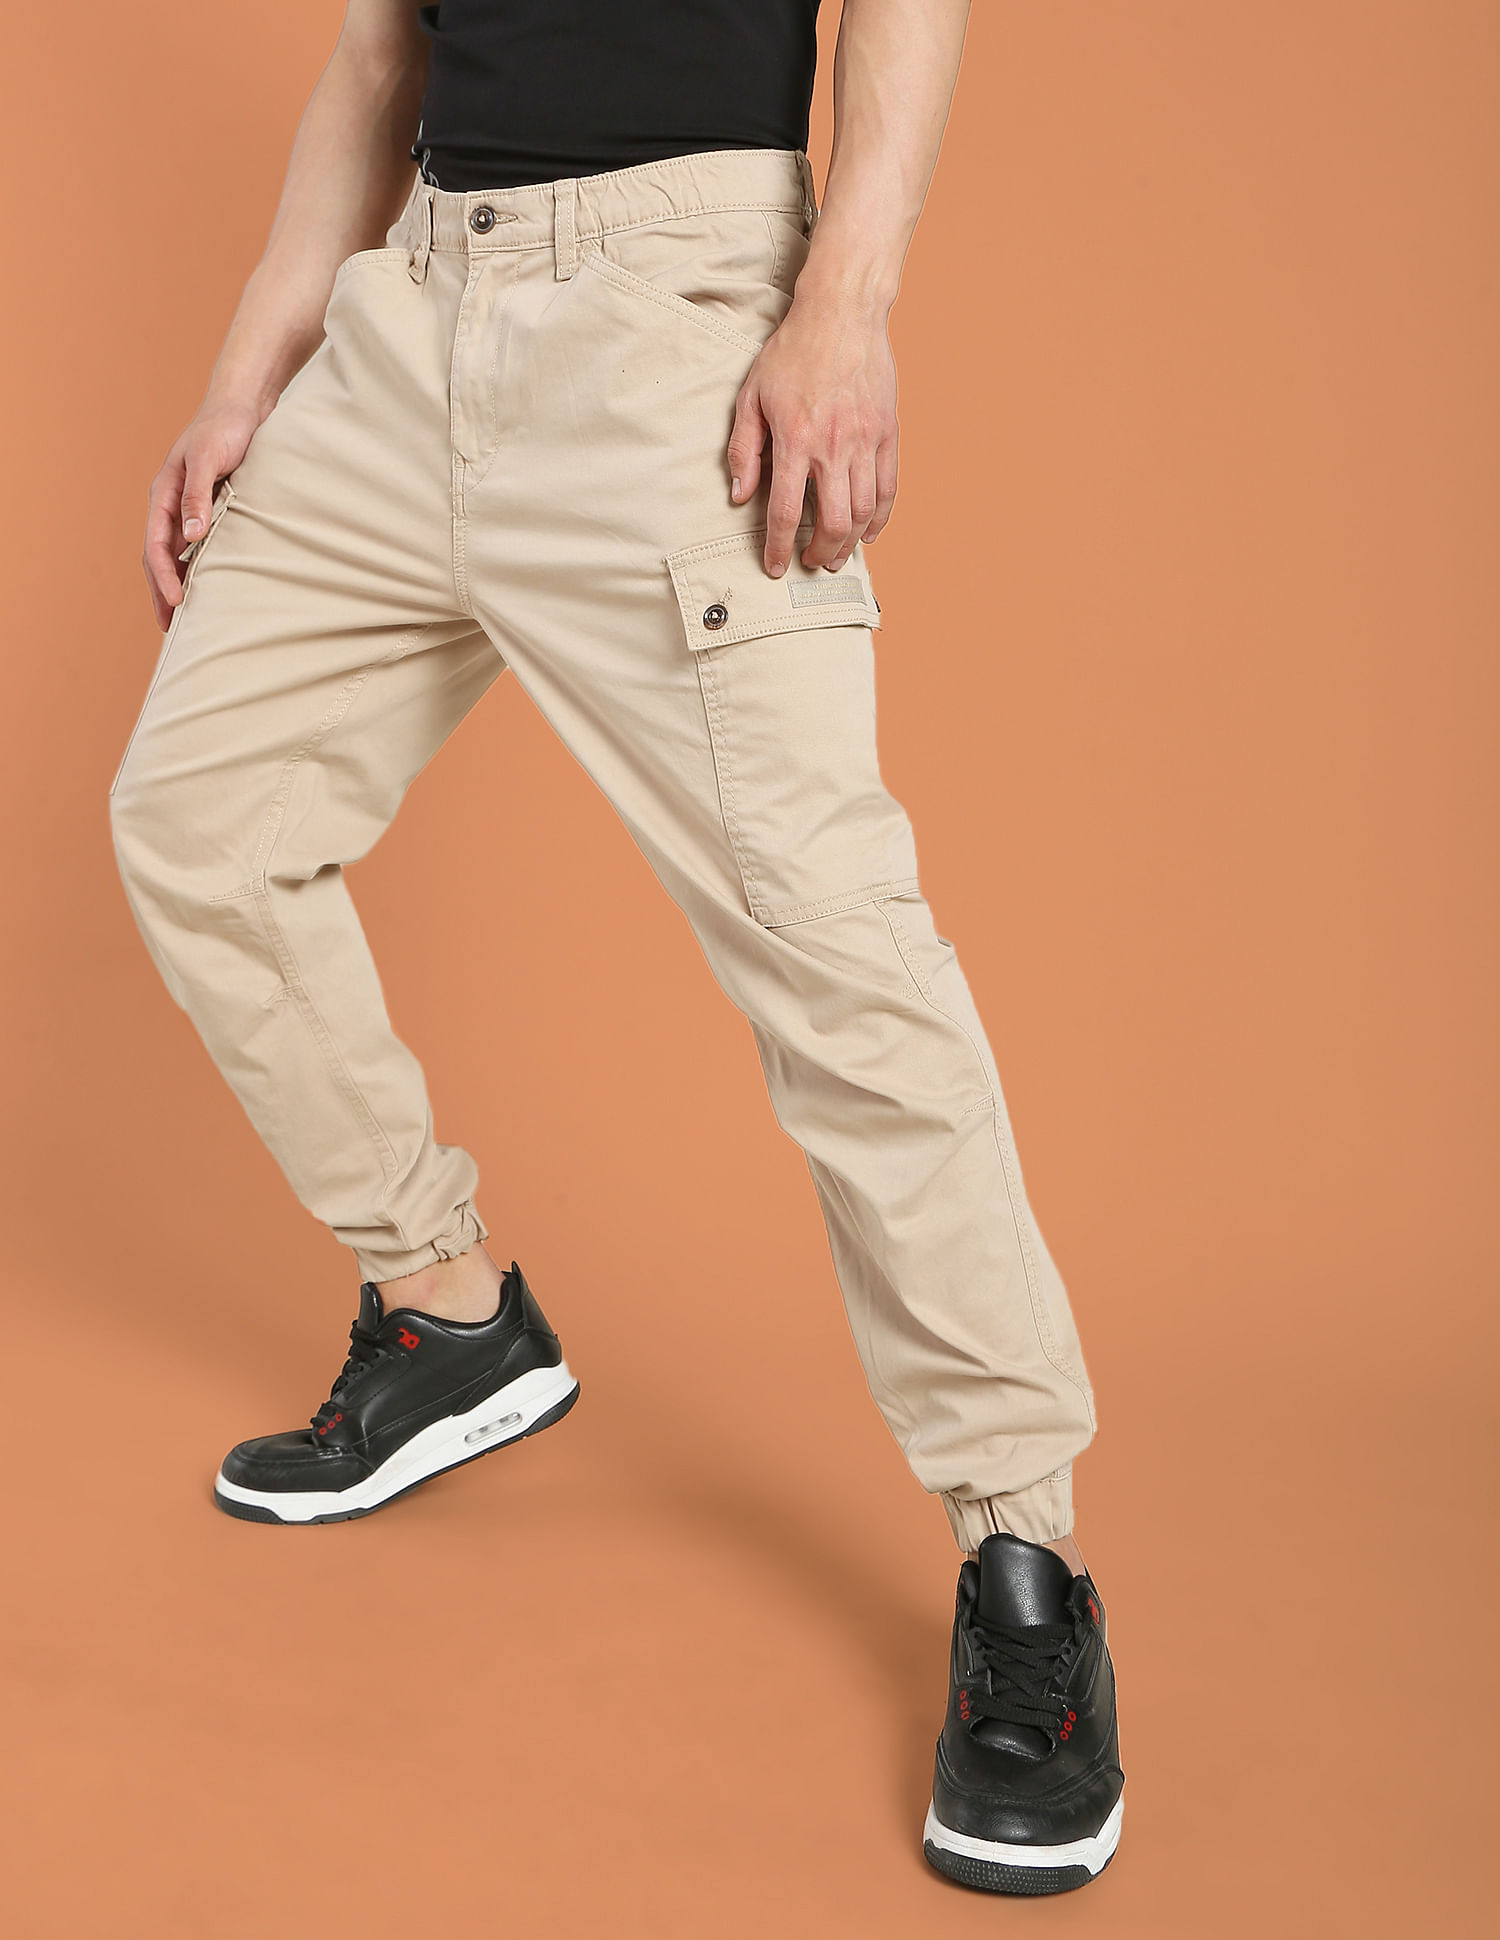 Buy Trousers & Pants Online at the Best Prices in India – Tones Fashion